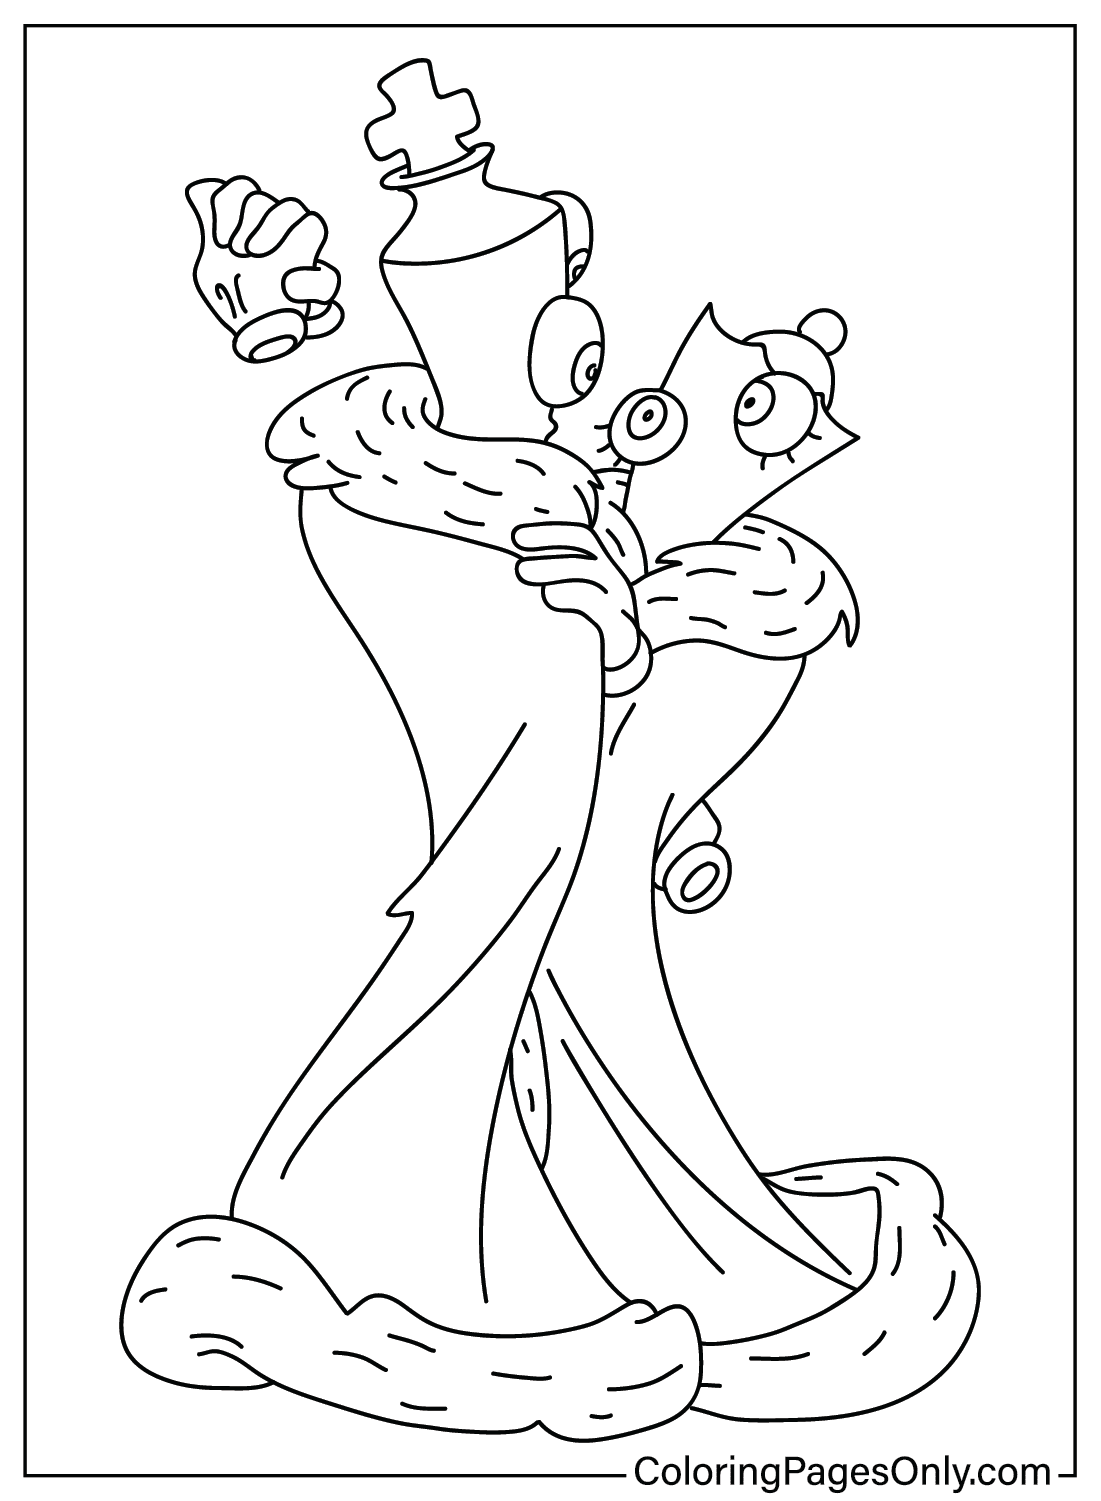 Kinger and Queener Coloring Page Free from The Amazing Digital Circus